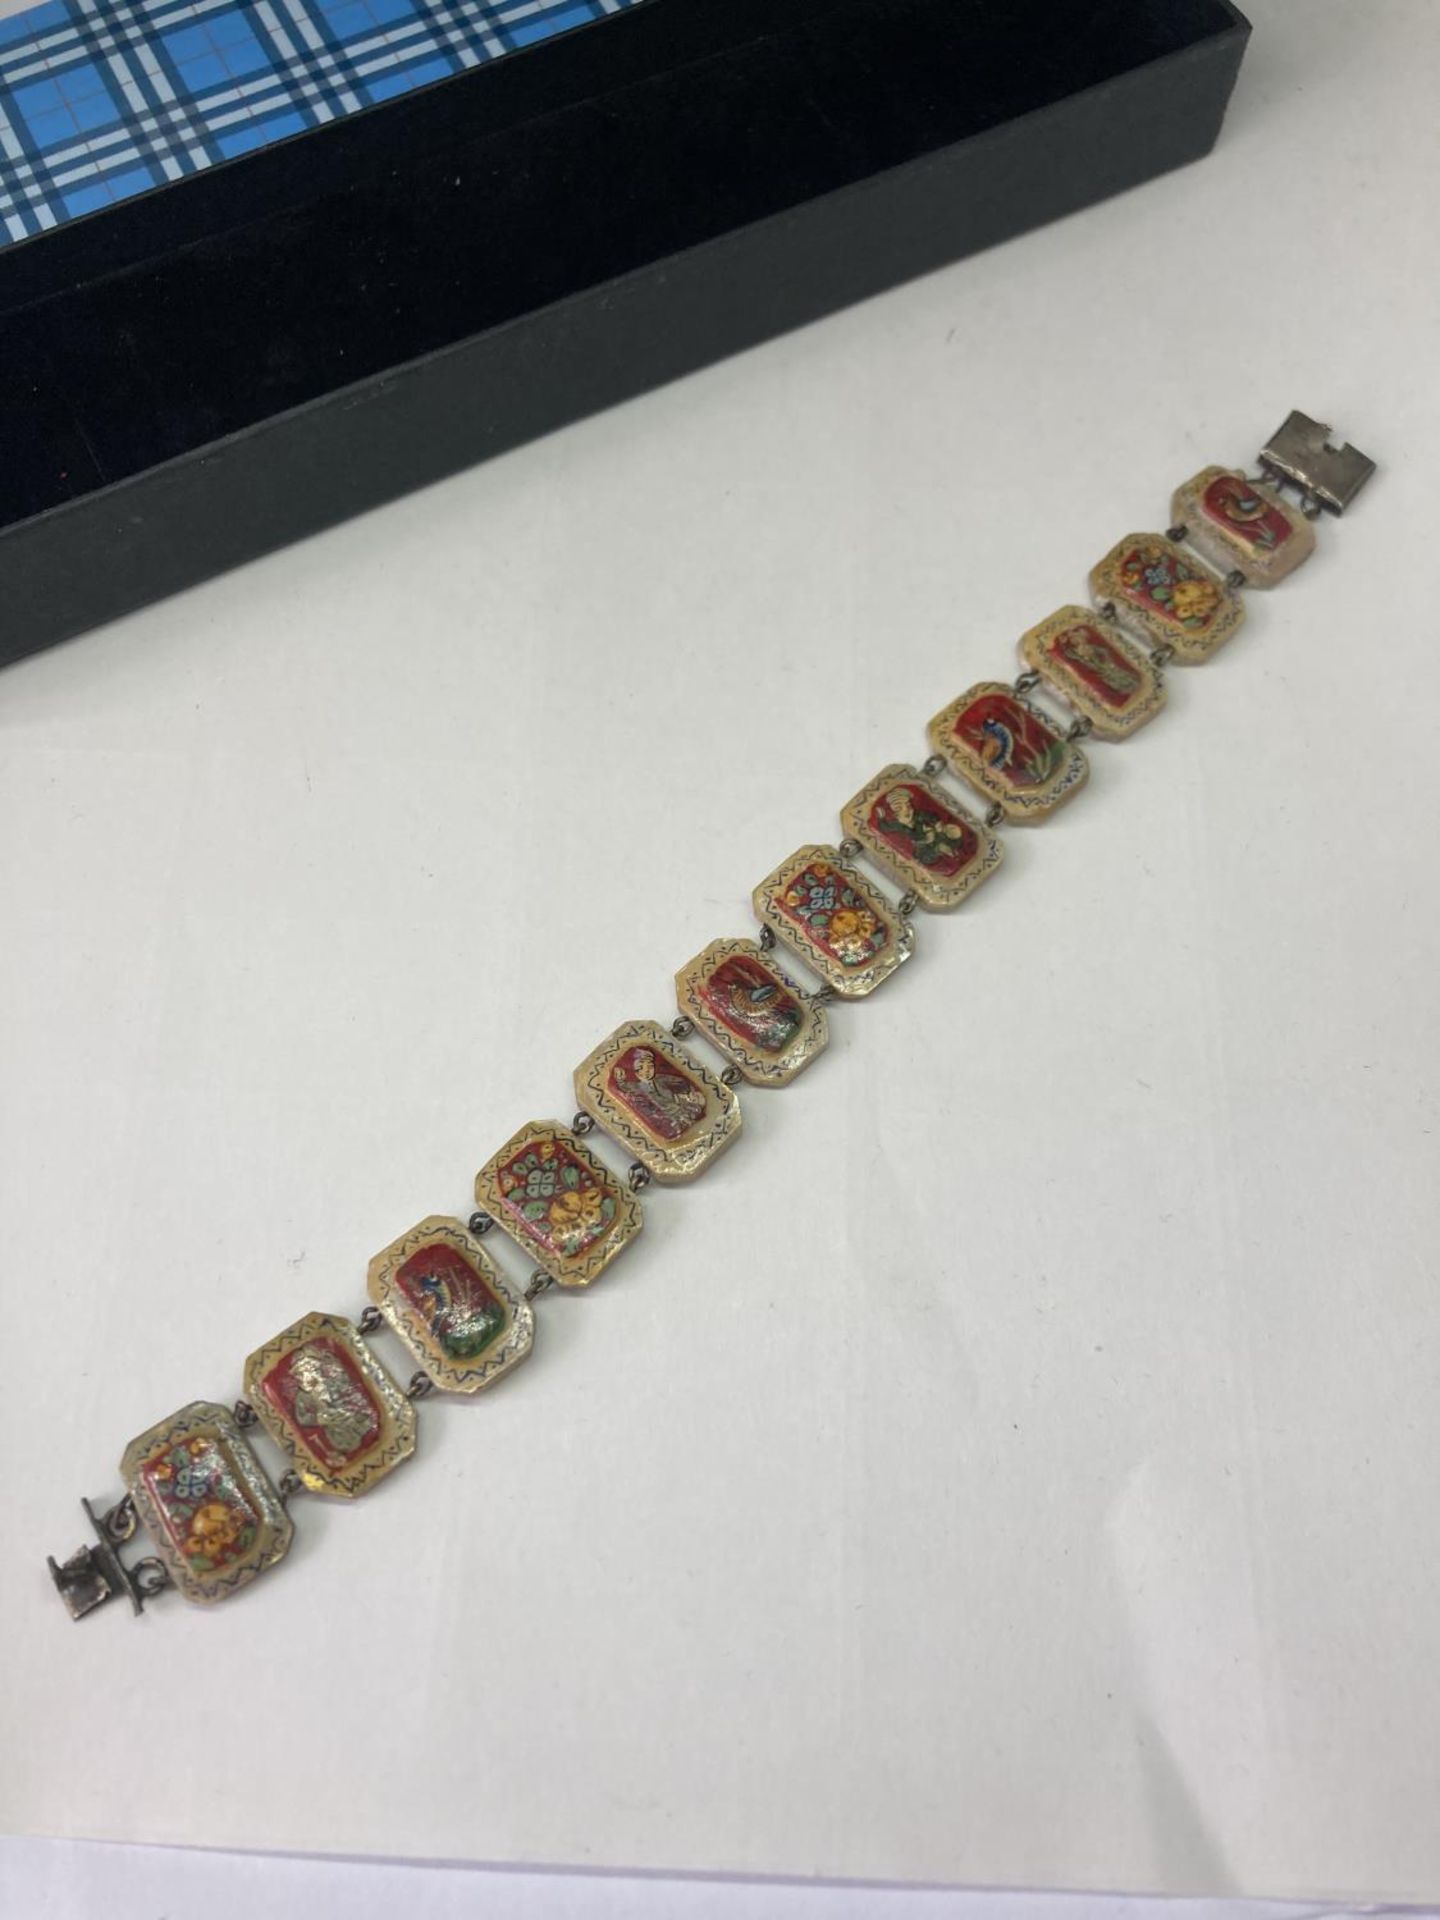 A DECORATIVE HAND PAINTED PERSIAN MOTHER OF PEARL BRACELET IN A PRESENTATION BOX - Image 4 of 12